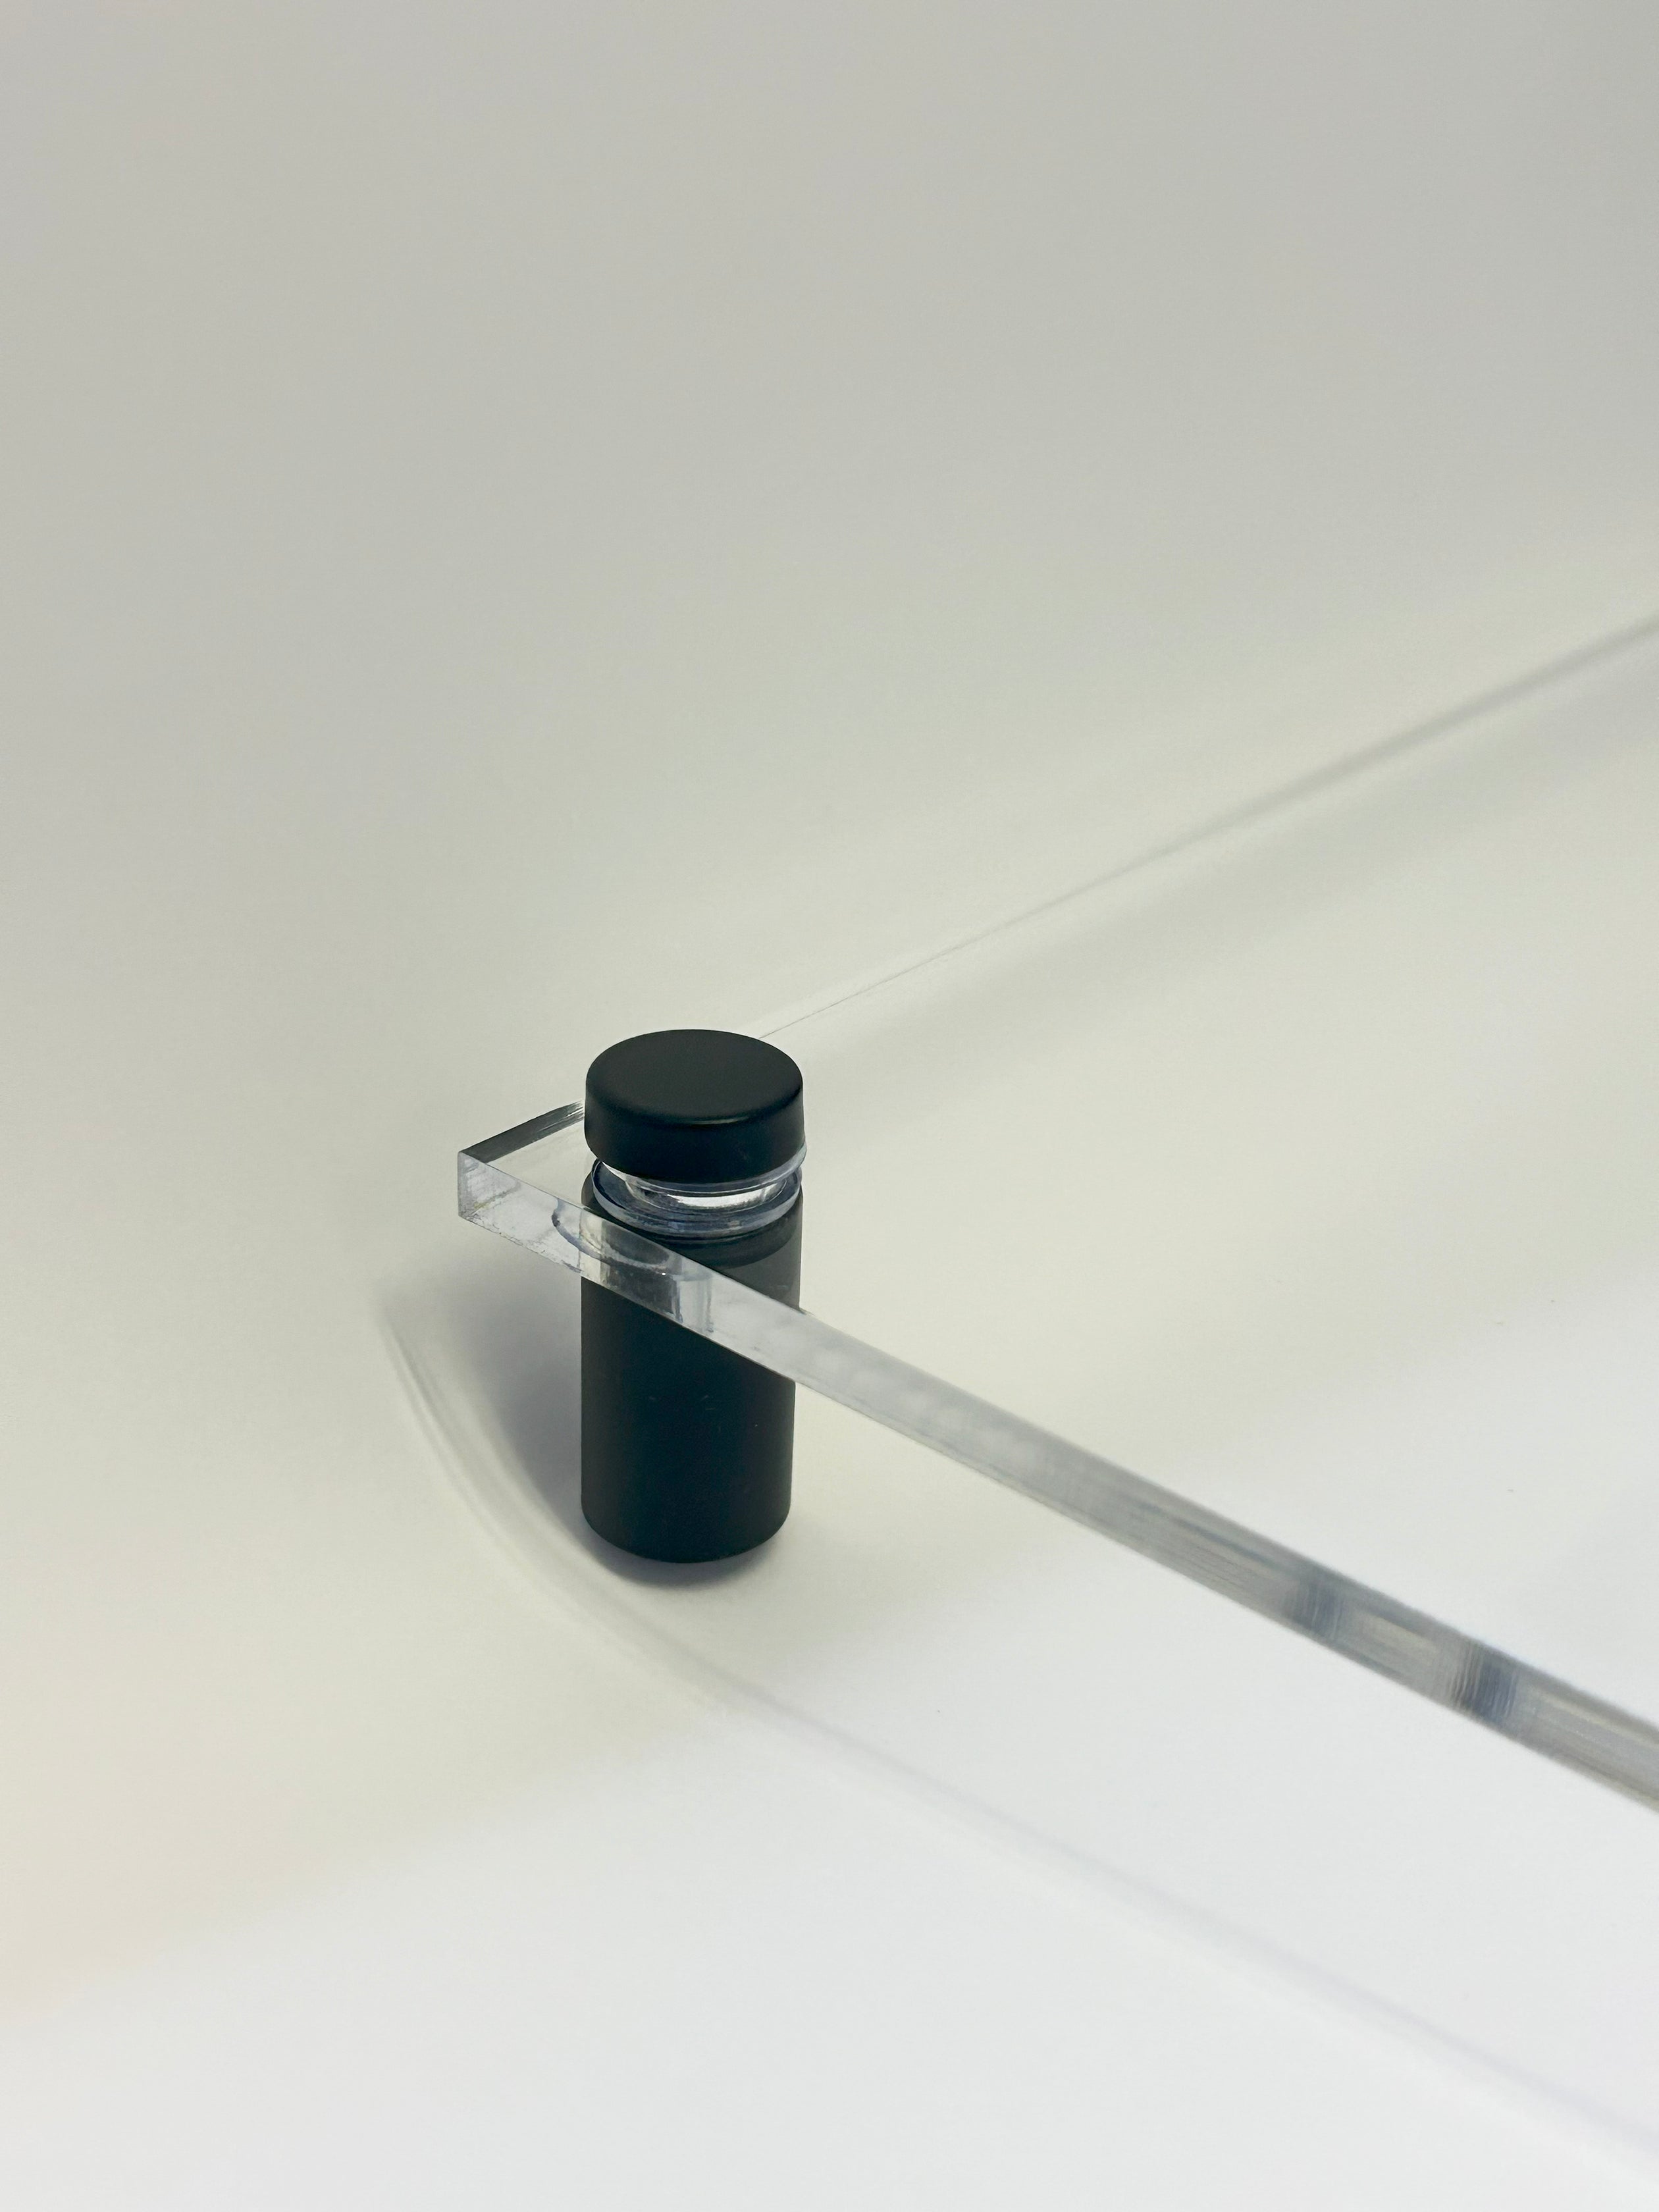 Close-up of a black cylindrical mount holding a transparent acrylic board, demonstrating the sturdy support and sleek design.